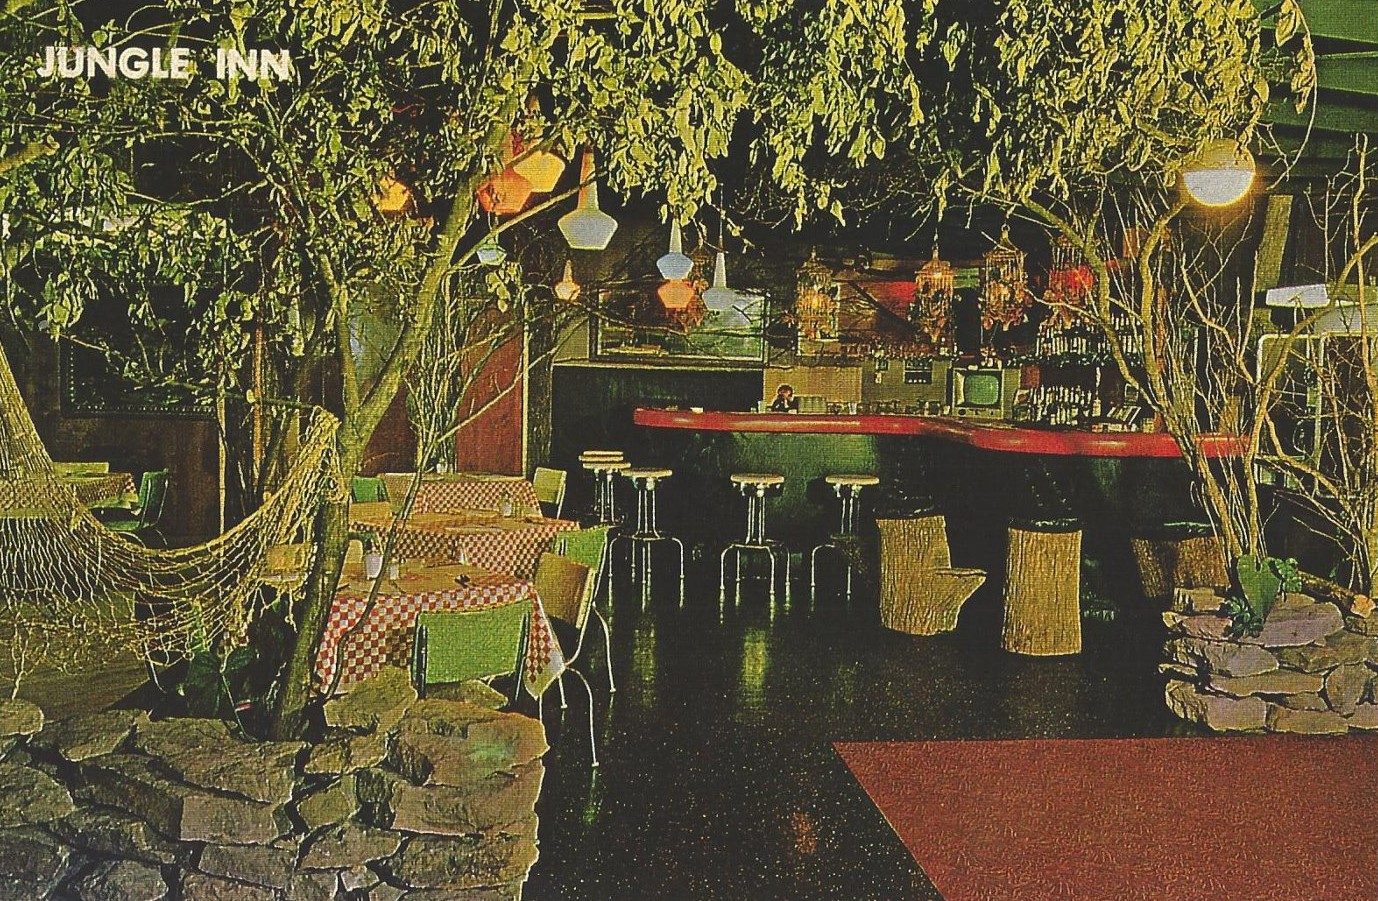 Jungle Club at the Gayla. Now Super 8 on old 20. Burned in the early 80s.